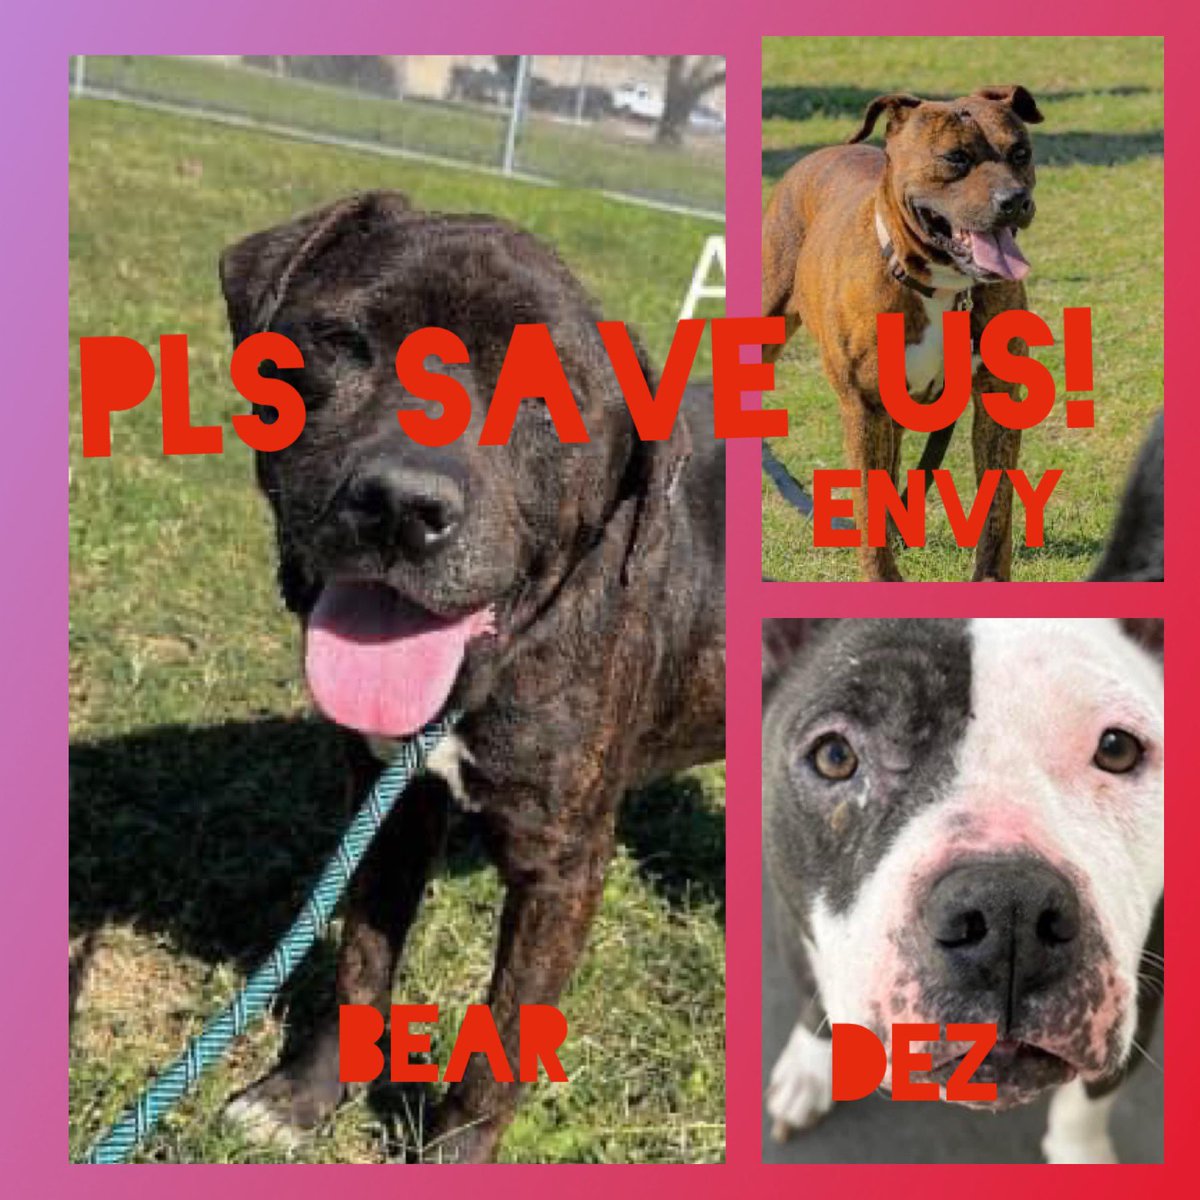 🆘💔Our TIME is ENDING😭in a few hours we’ll be 🔥KILLED🔥#Corpuschristi TX AC and forgotten. Pls SAVE us, don’t stop trying 🙏
💔DEZ #A365898 sweet senior
💔ENVY #A363002 adopted and returned 
💔BEAR #A366173 senior
Why none is coming for us?😭